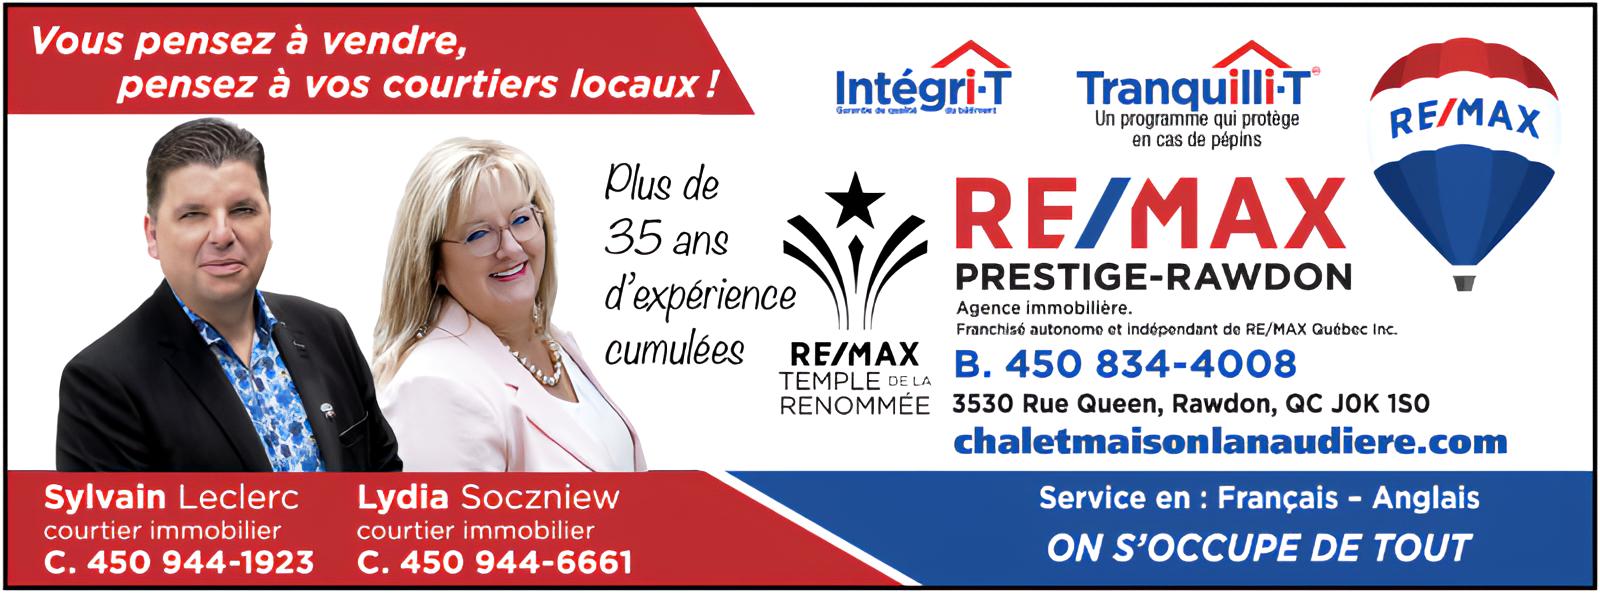 courtier immobilier chertsey